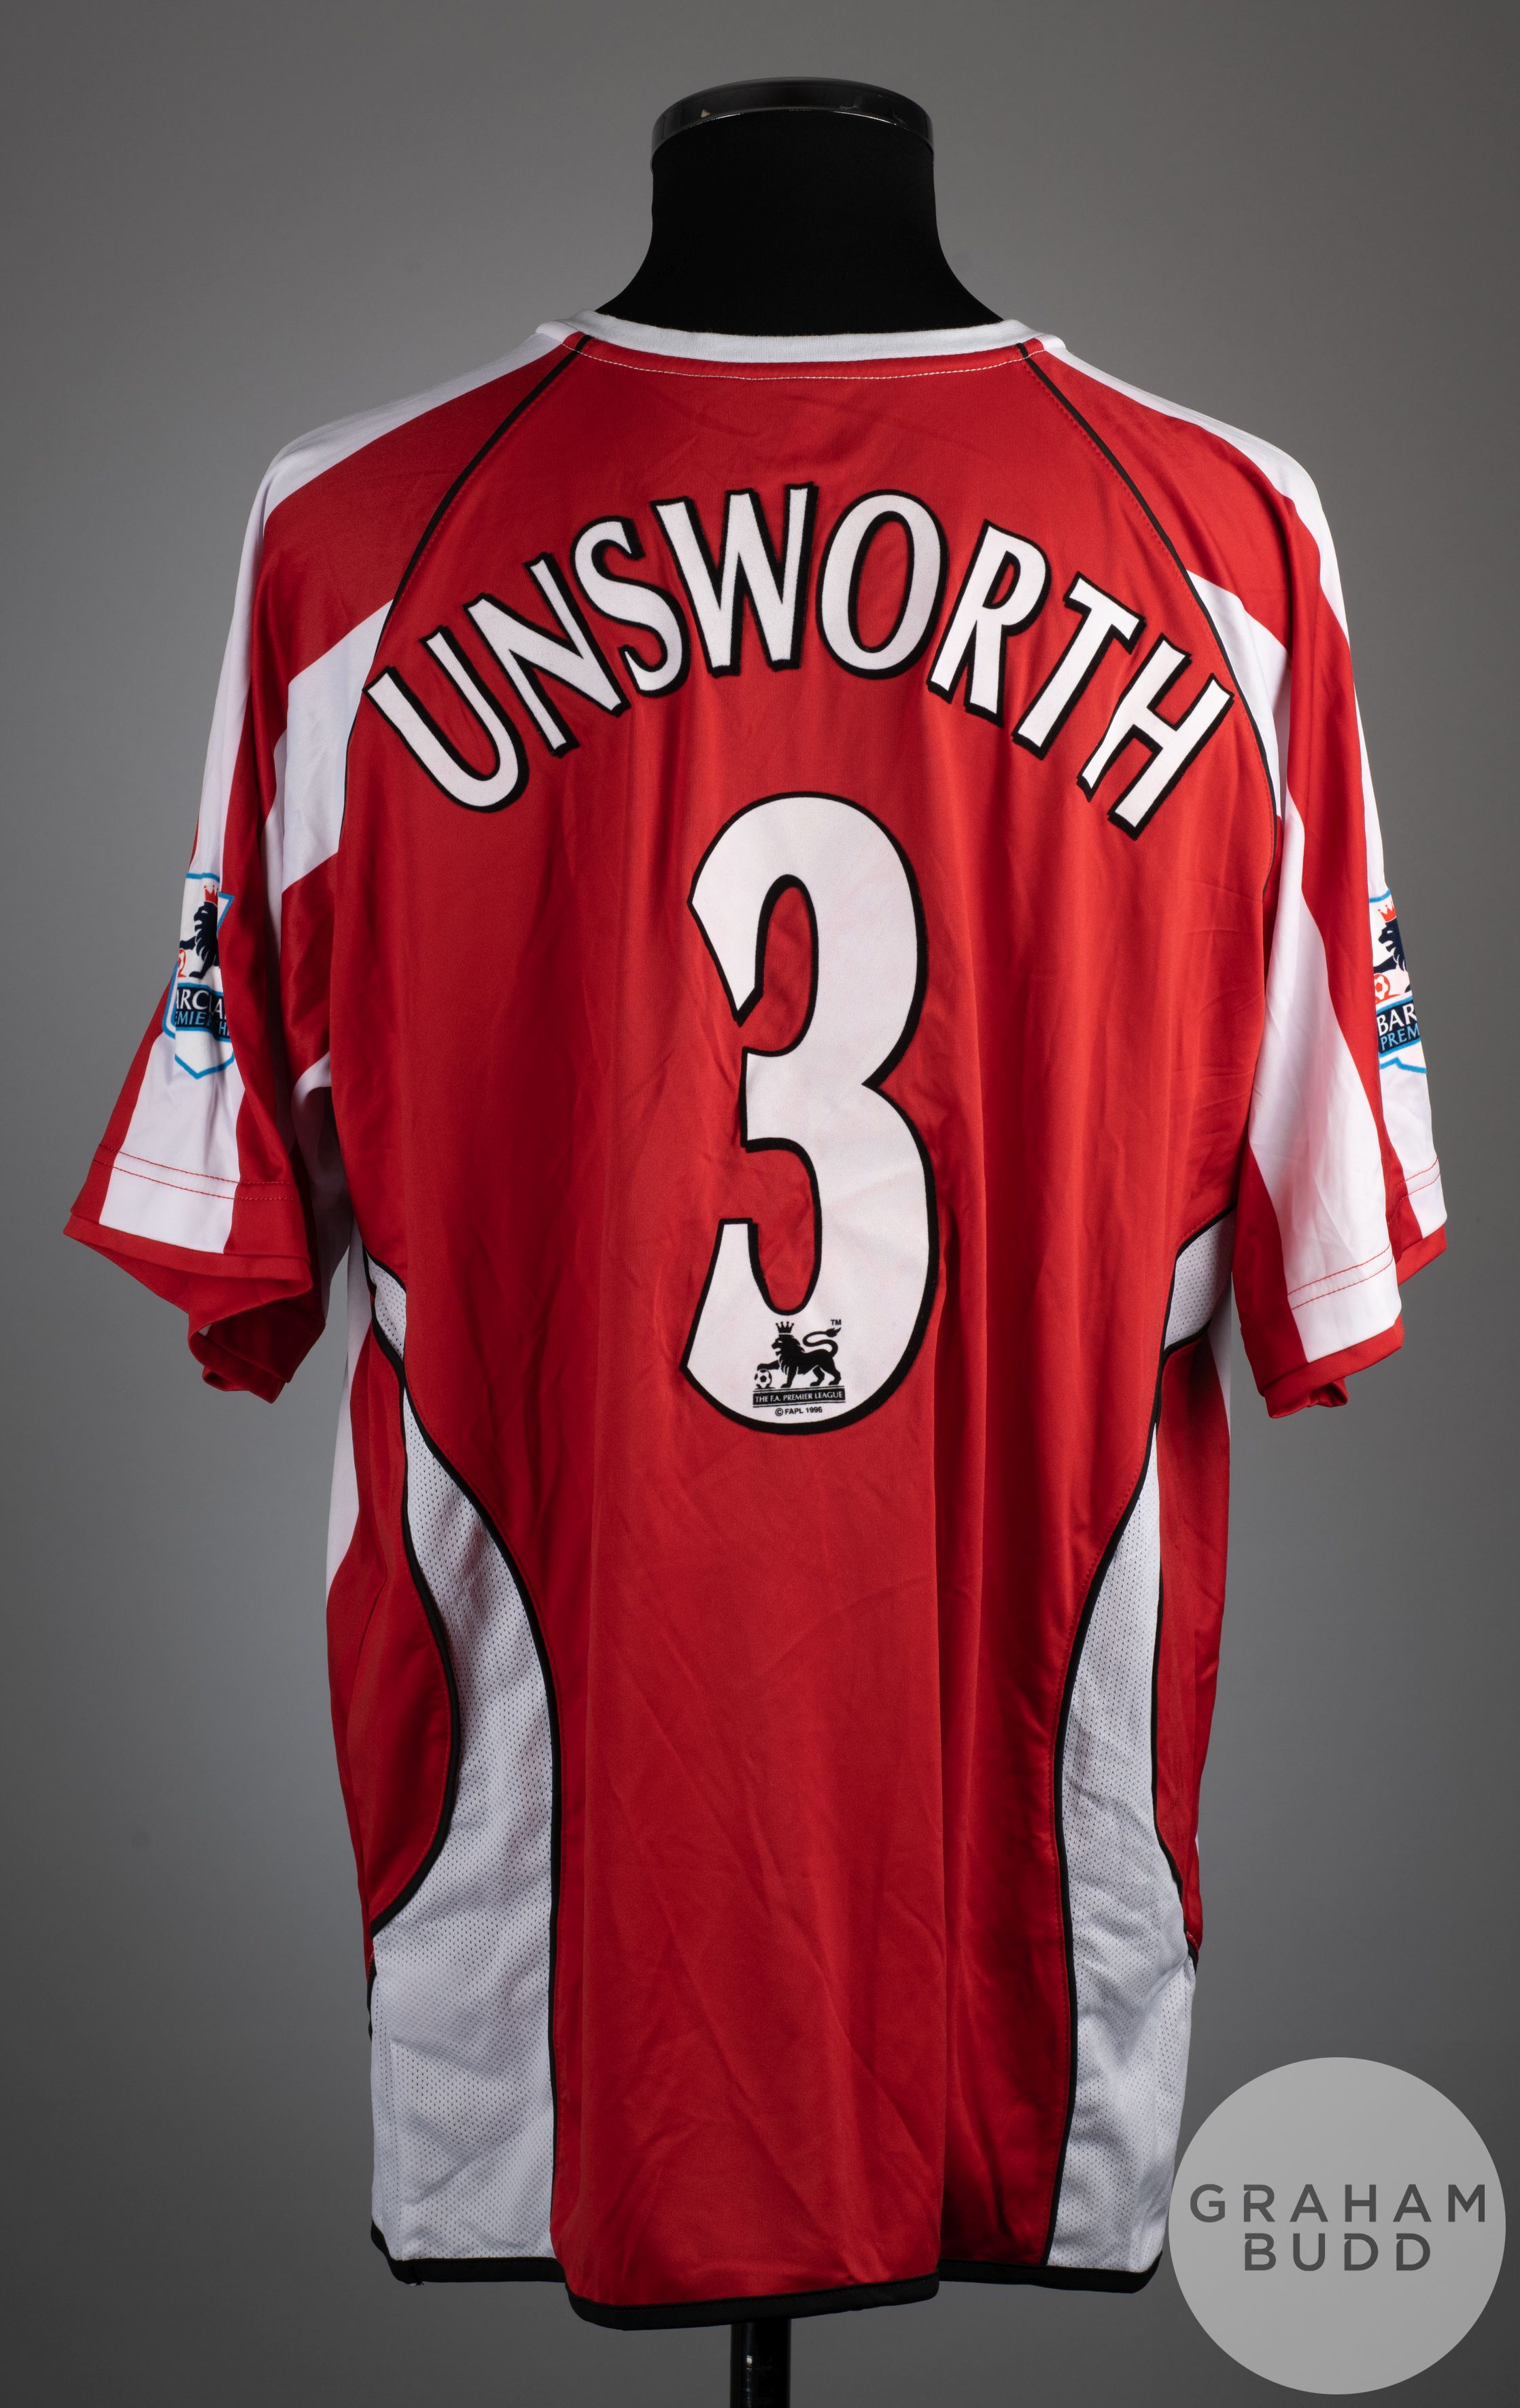 David Unsworth red and white No.3 Sheffield United short sleeved shirt 2006-07 - Image 2 of 2